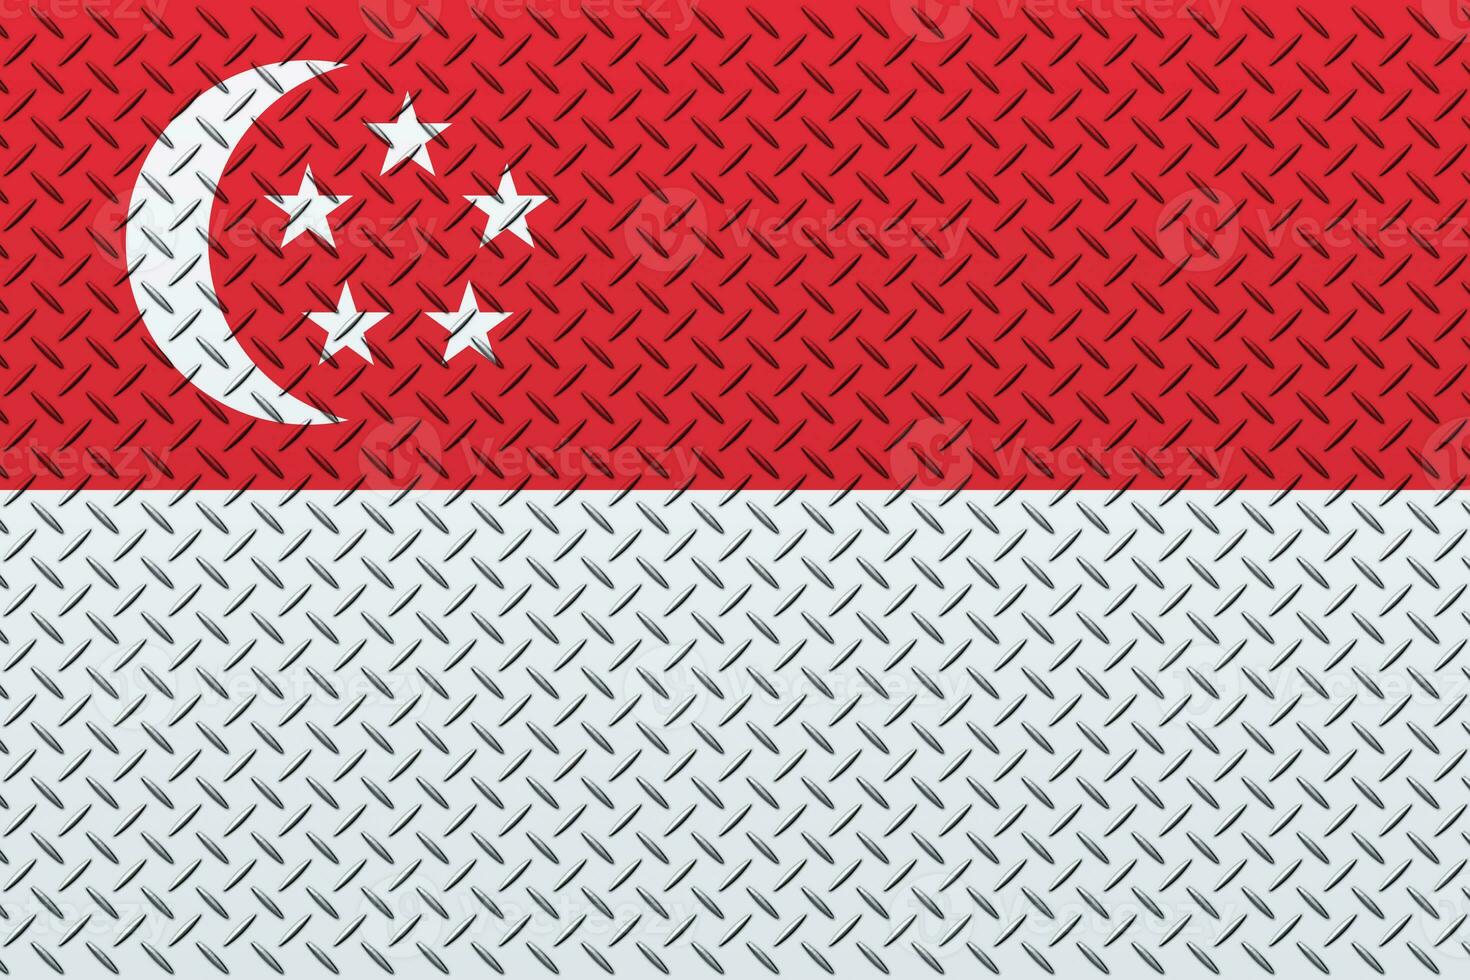 3D Flag of Singapore on a metal wall background. photo